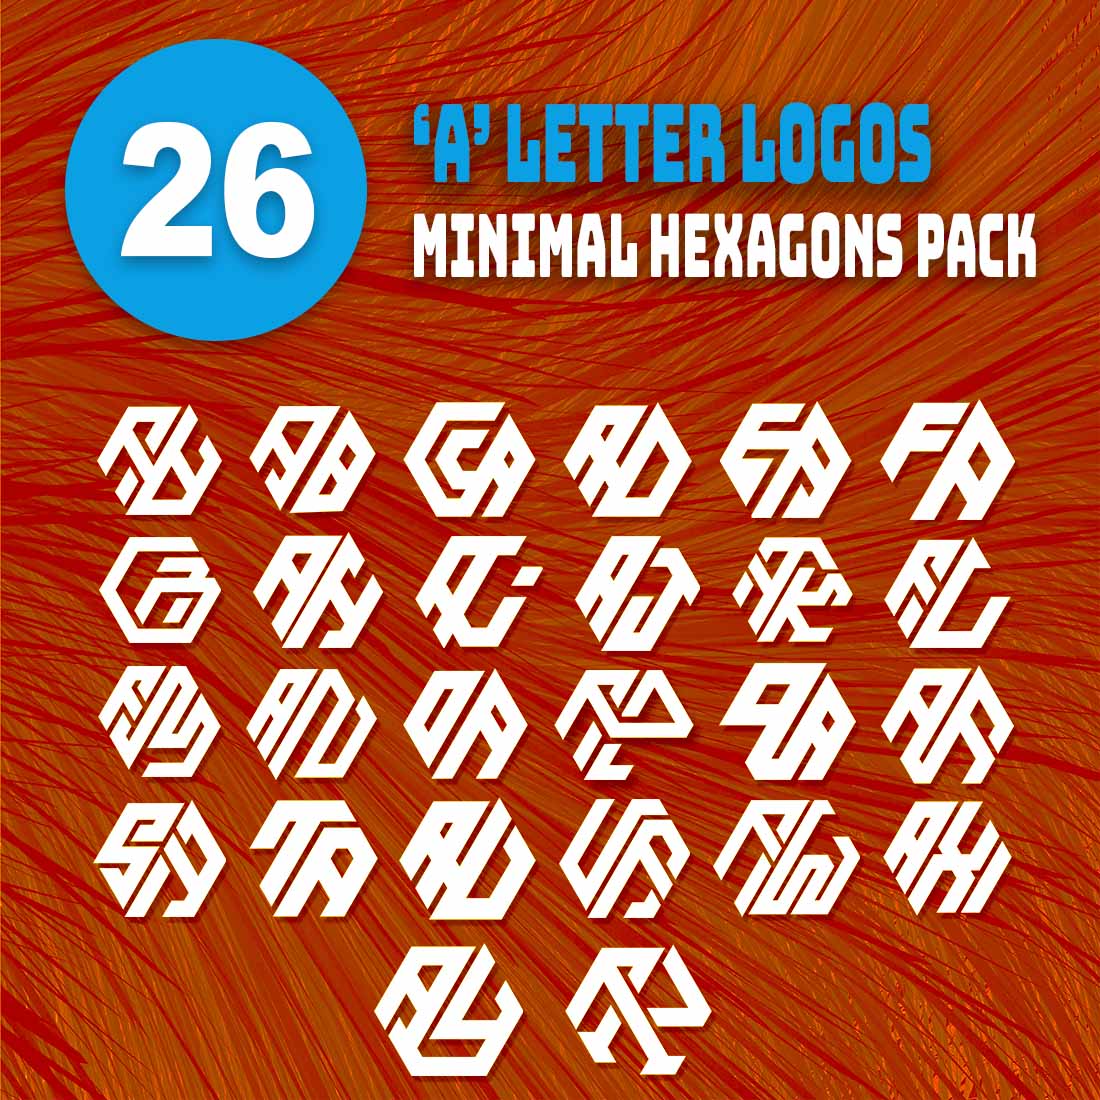 26 A Letter Logos | Minimal Hexagons Pack cover image.